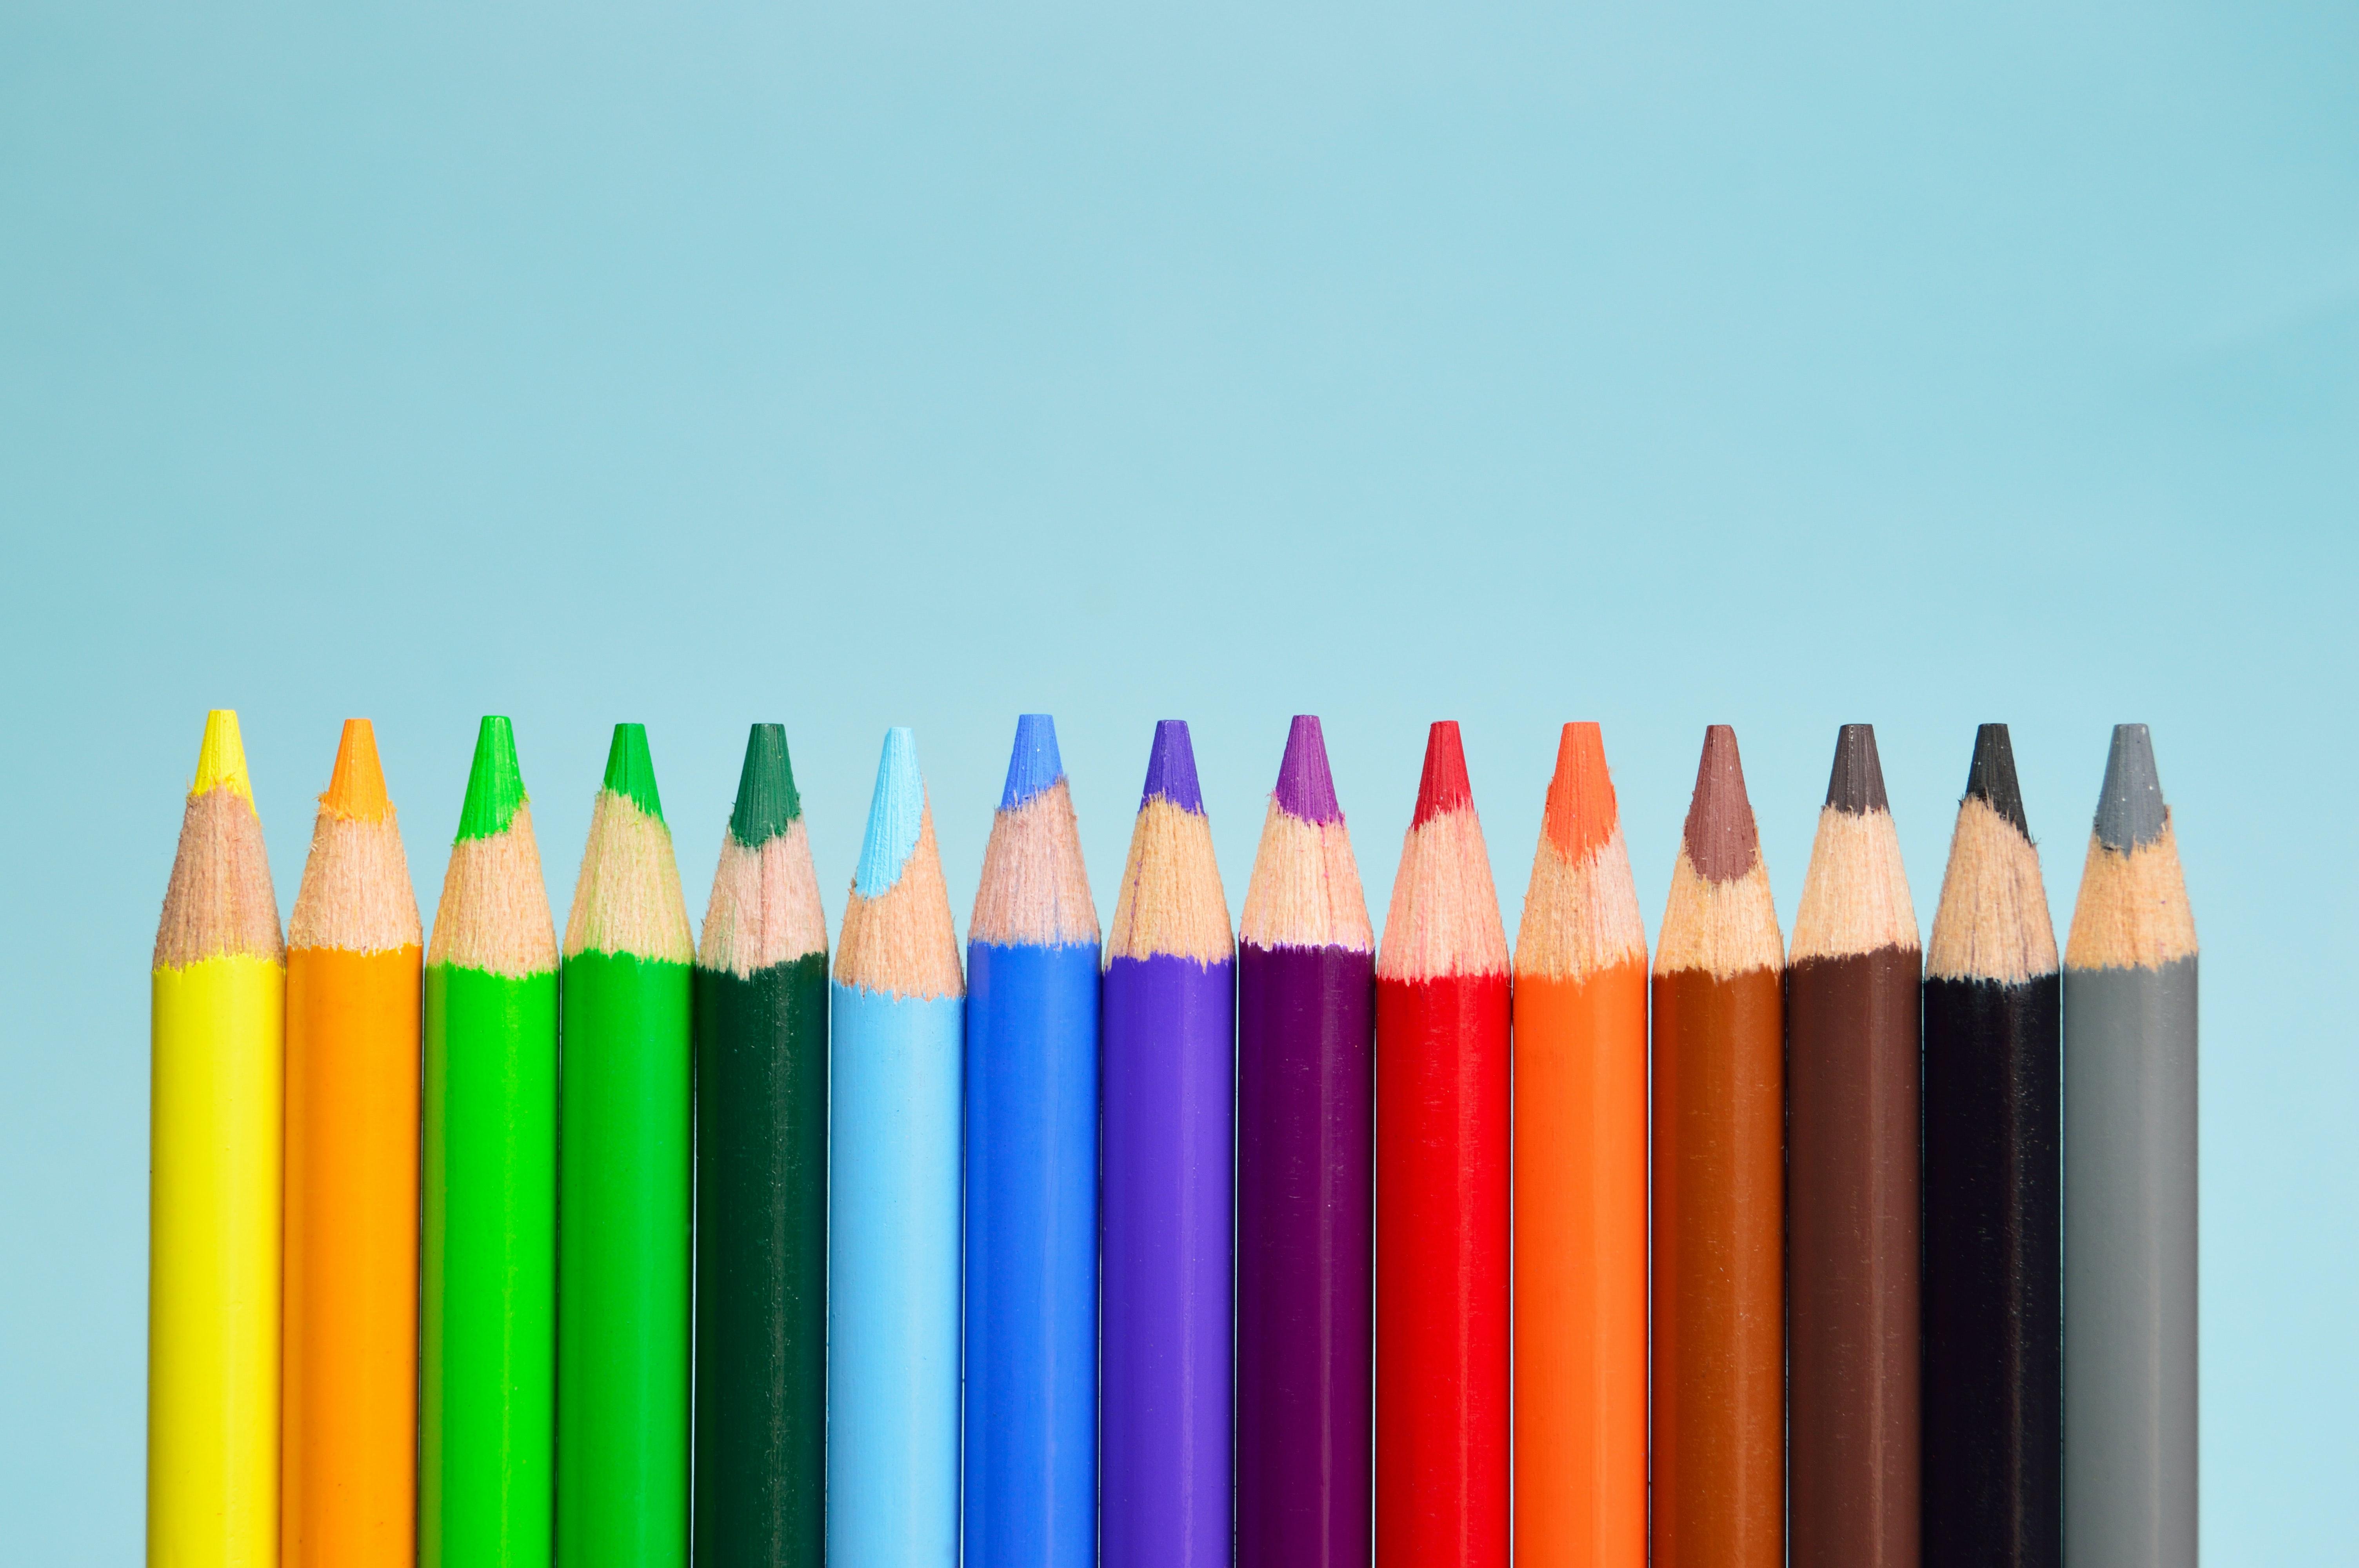 How did crayons impact the world? 